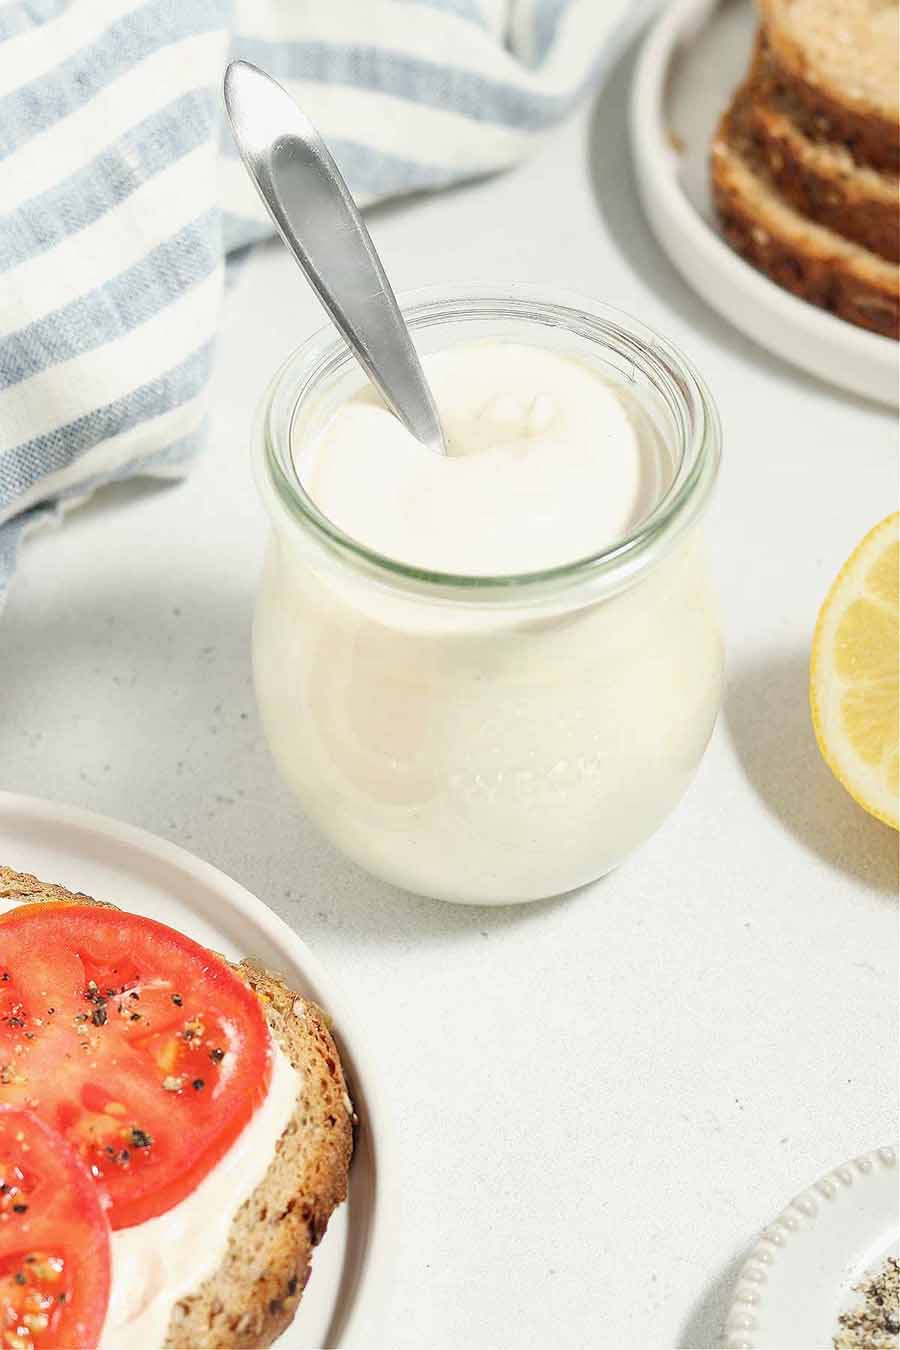 Vegan mayo in a jar on a table